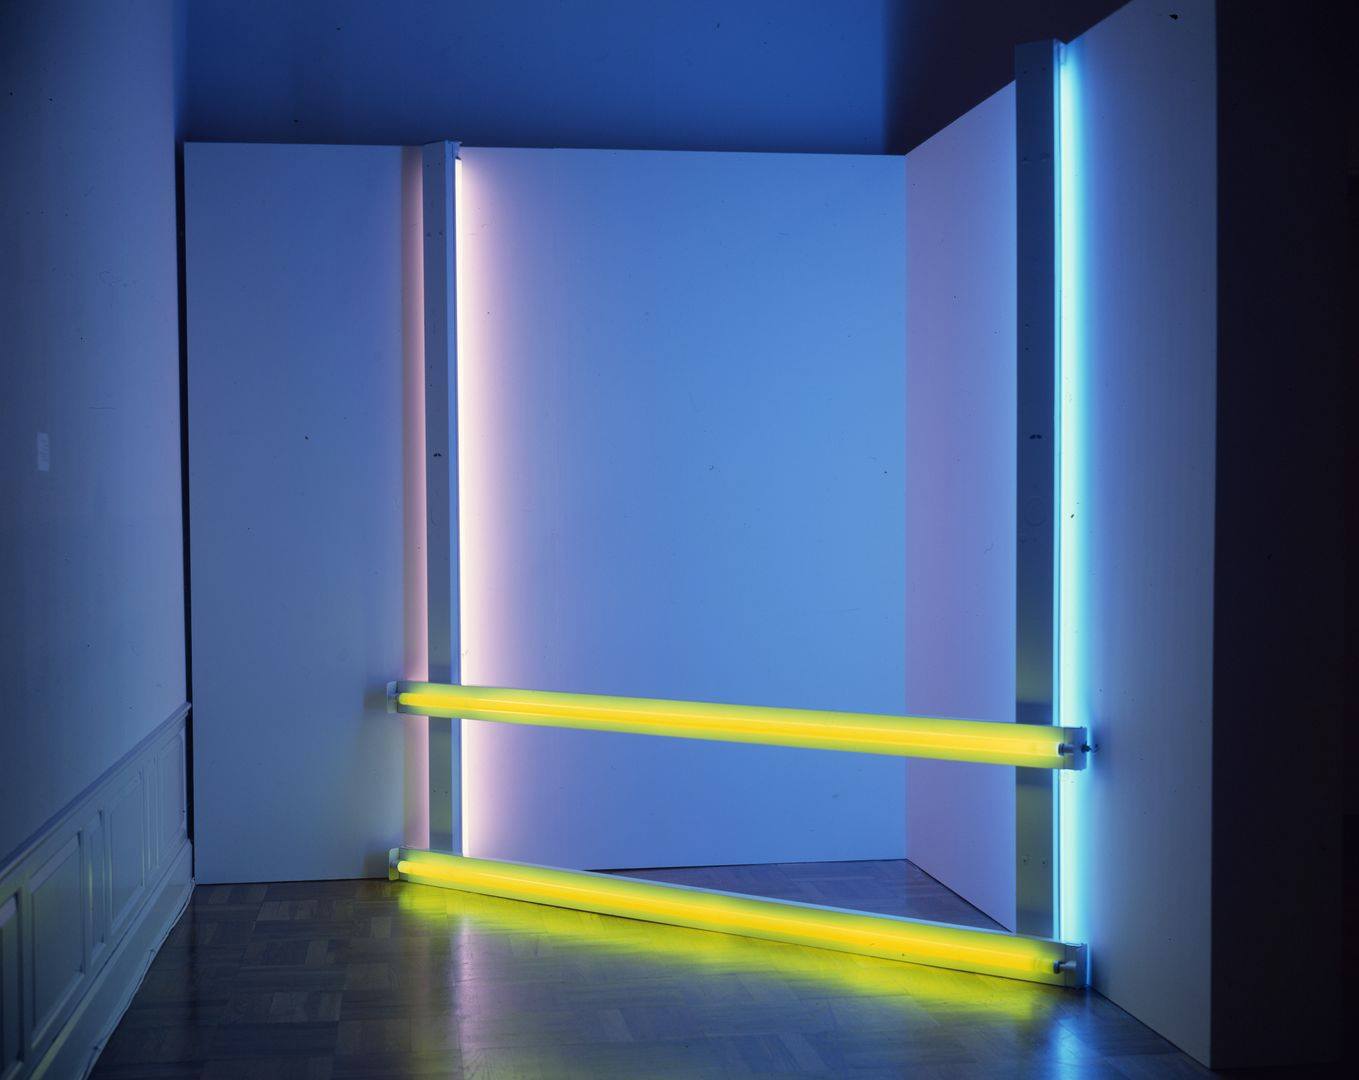 Untitled (to Donna) 2, 96 ¼ x 96, fluorescent light. An installation of fluorescent lights positioned in a corner consisting of two bright yellow lights running horizontally at floor and knee level and two fluorescent lights running horizontally at each end with the light component facing the wall. The horizontal lights are bright blue at the right and mauve at the left. All four lights cast their colors on the corner walls and floor.